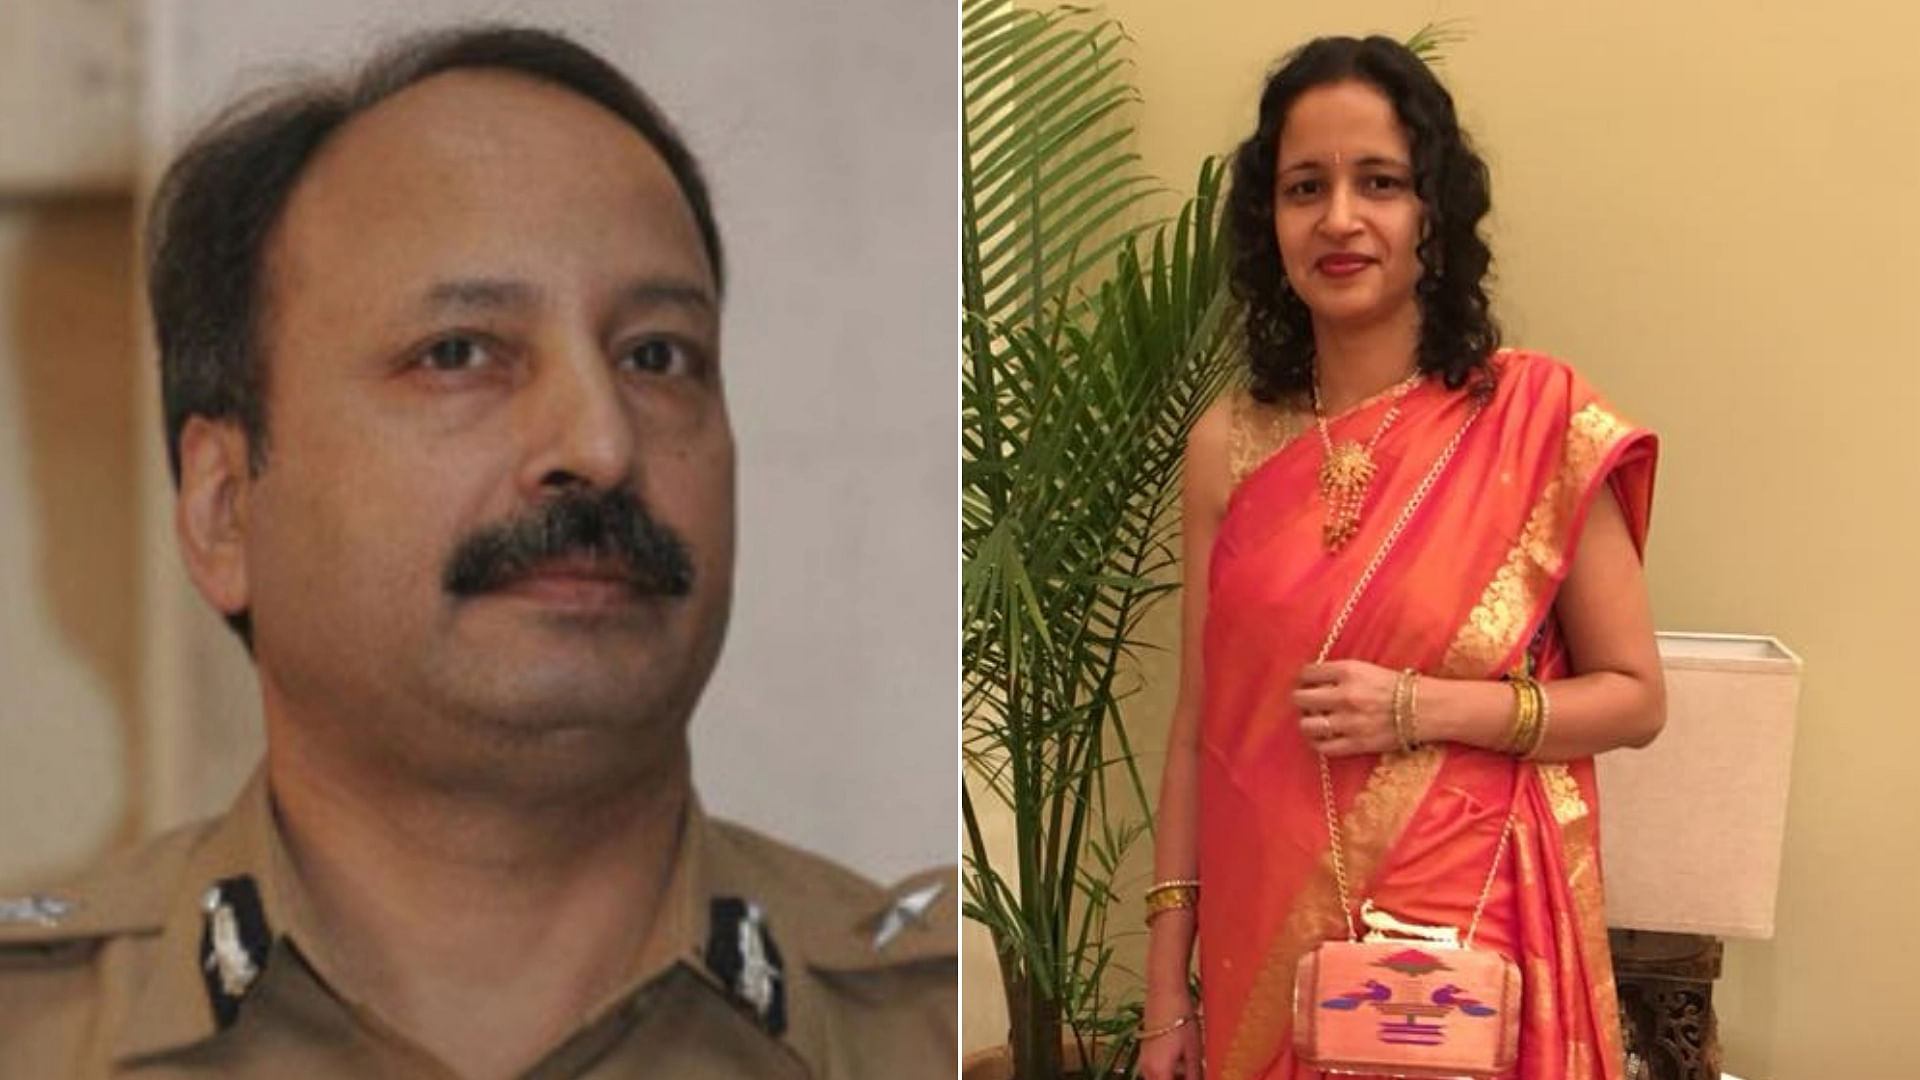 “He taught us that terrorism has no religion,” Jui Navare, Karkare’s daughter said in the interview.